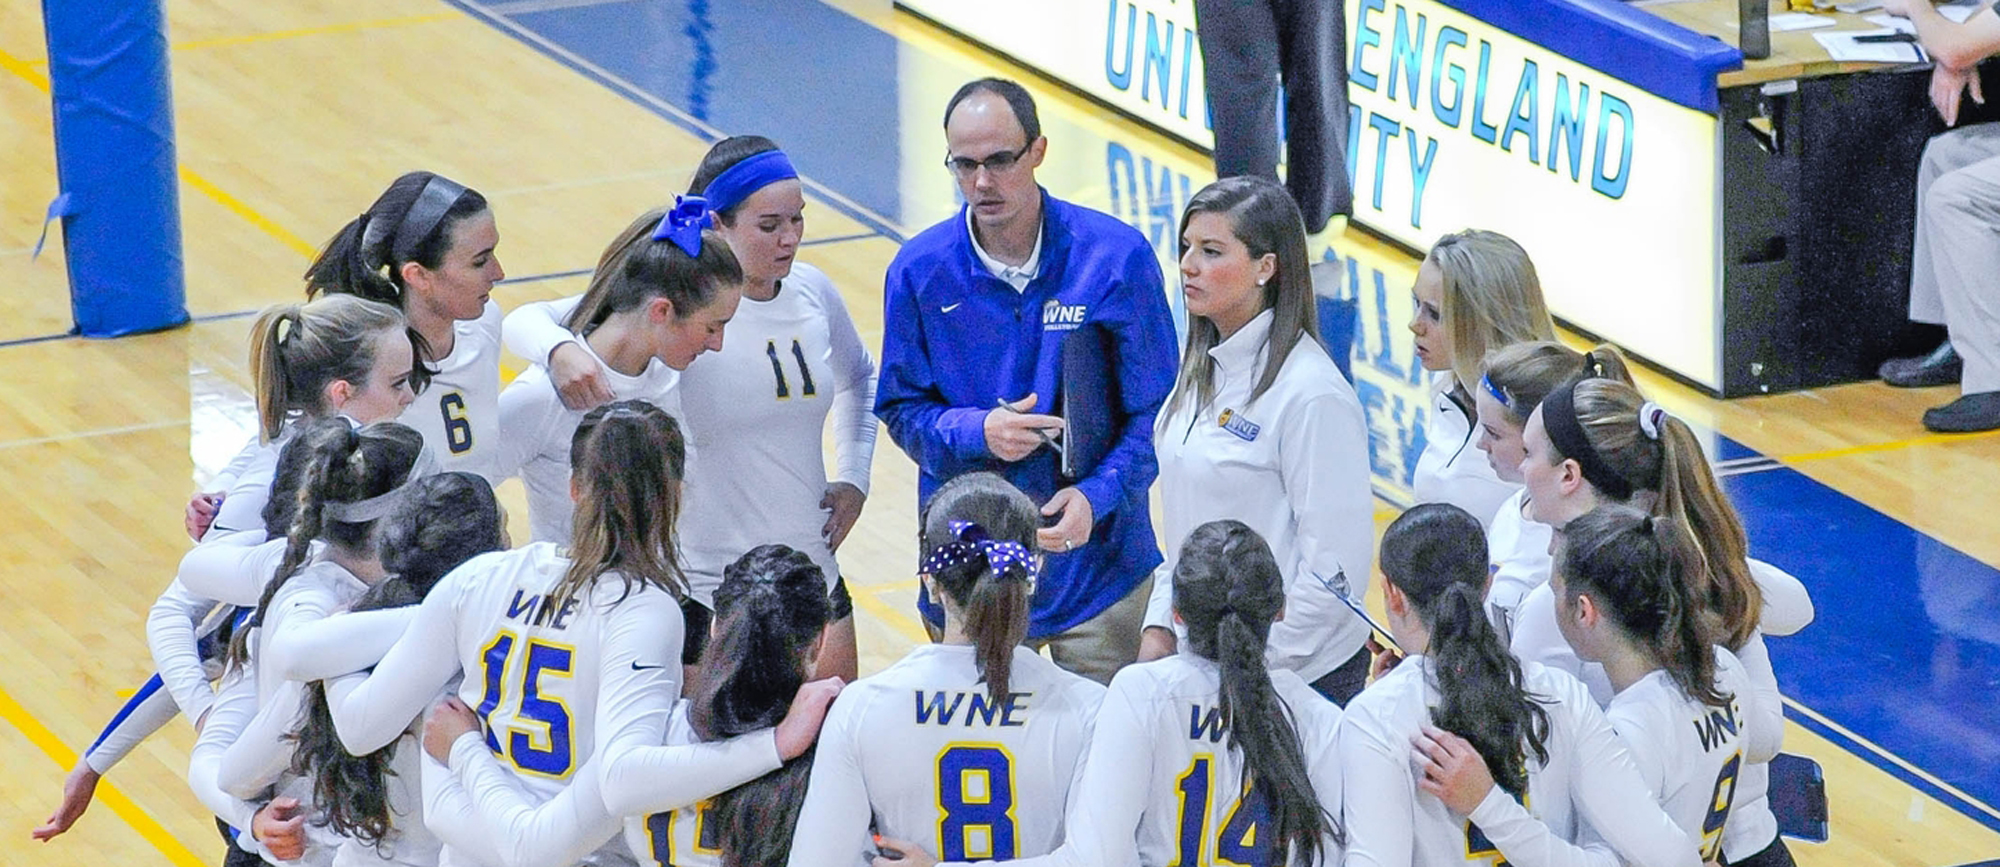 Bret Stothart Steps Down as Volleyball Coach at Western New England